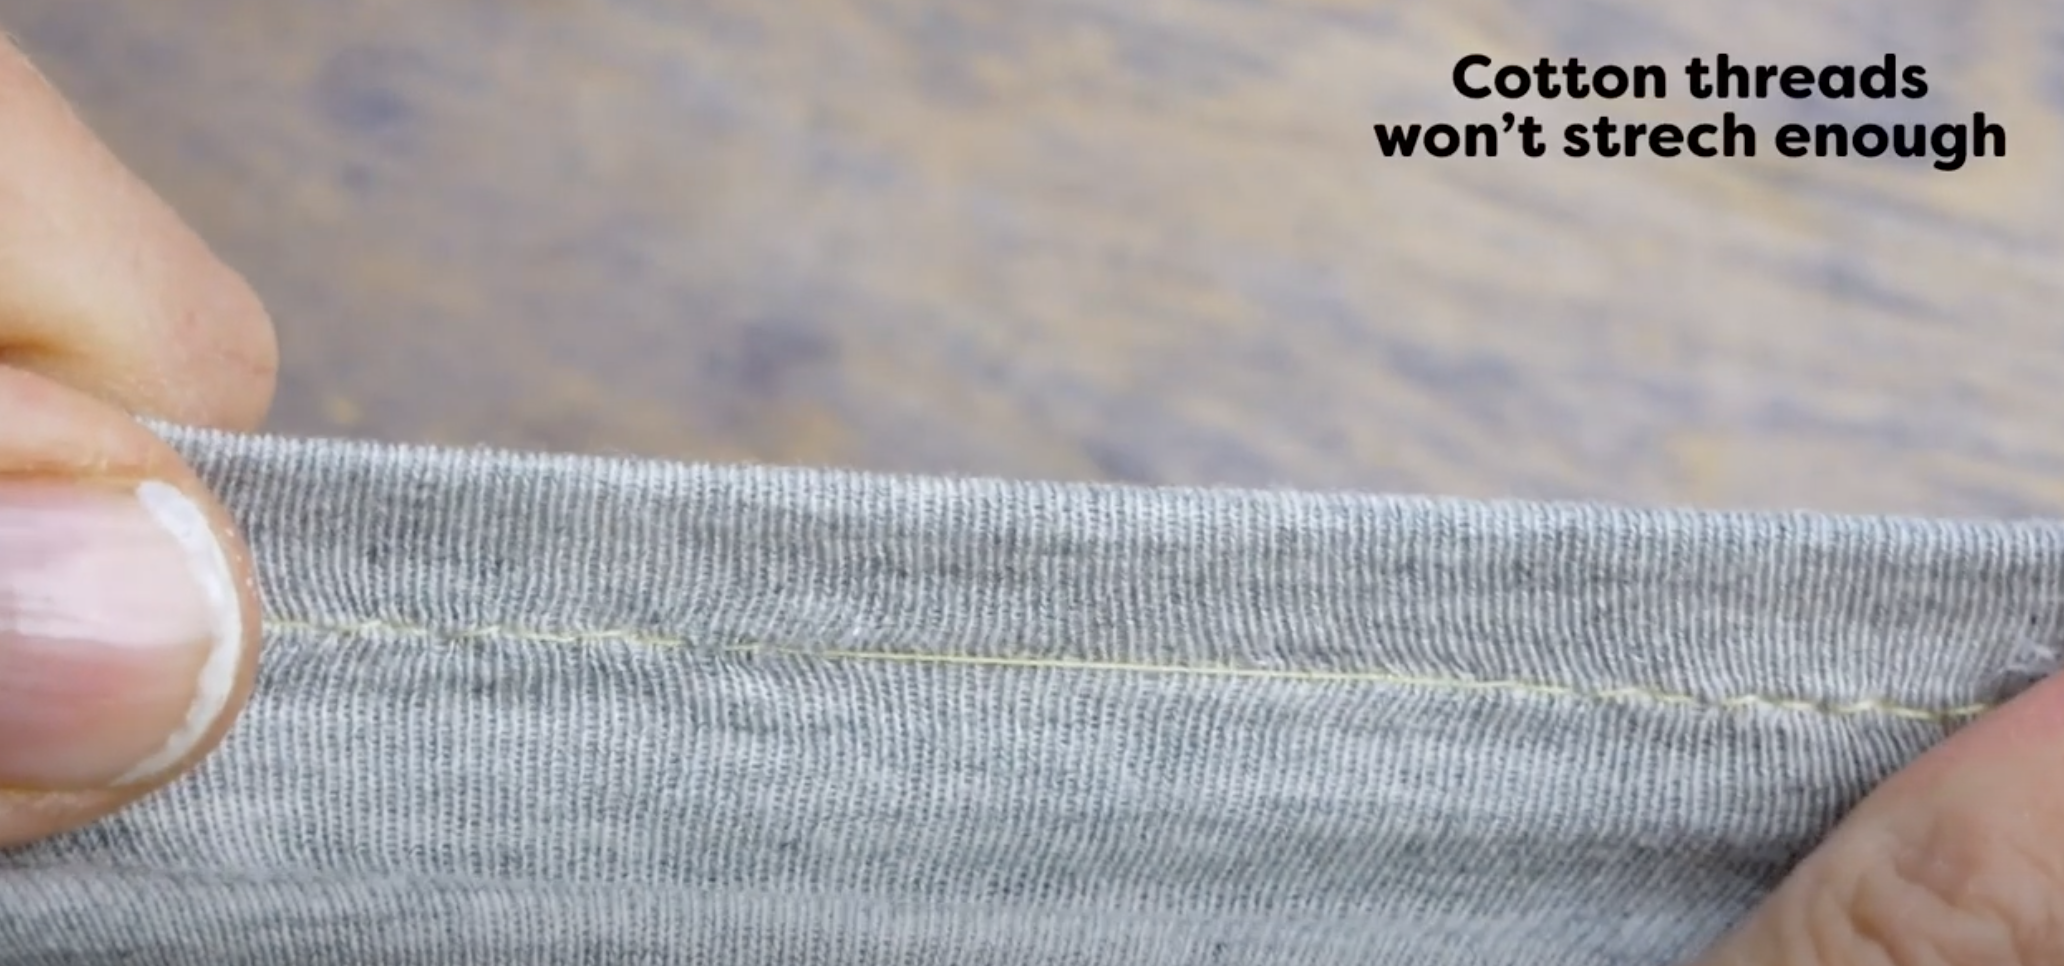 WonderFil Specialty Threads - How to Sew with Stretch Fabric